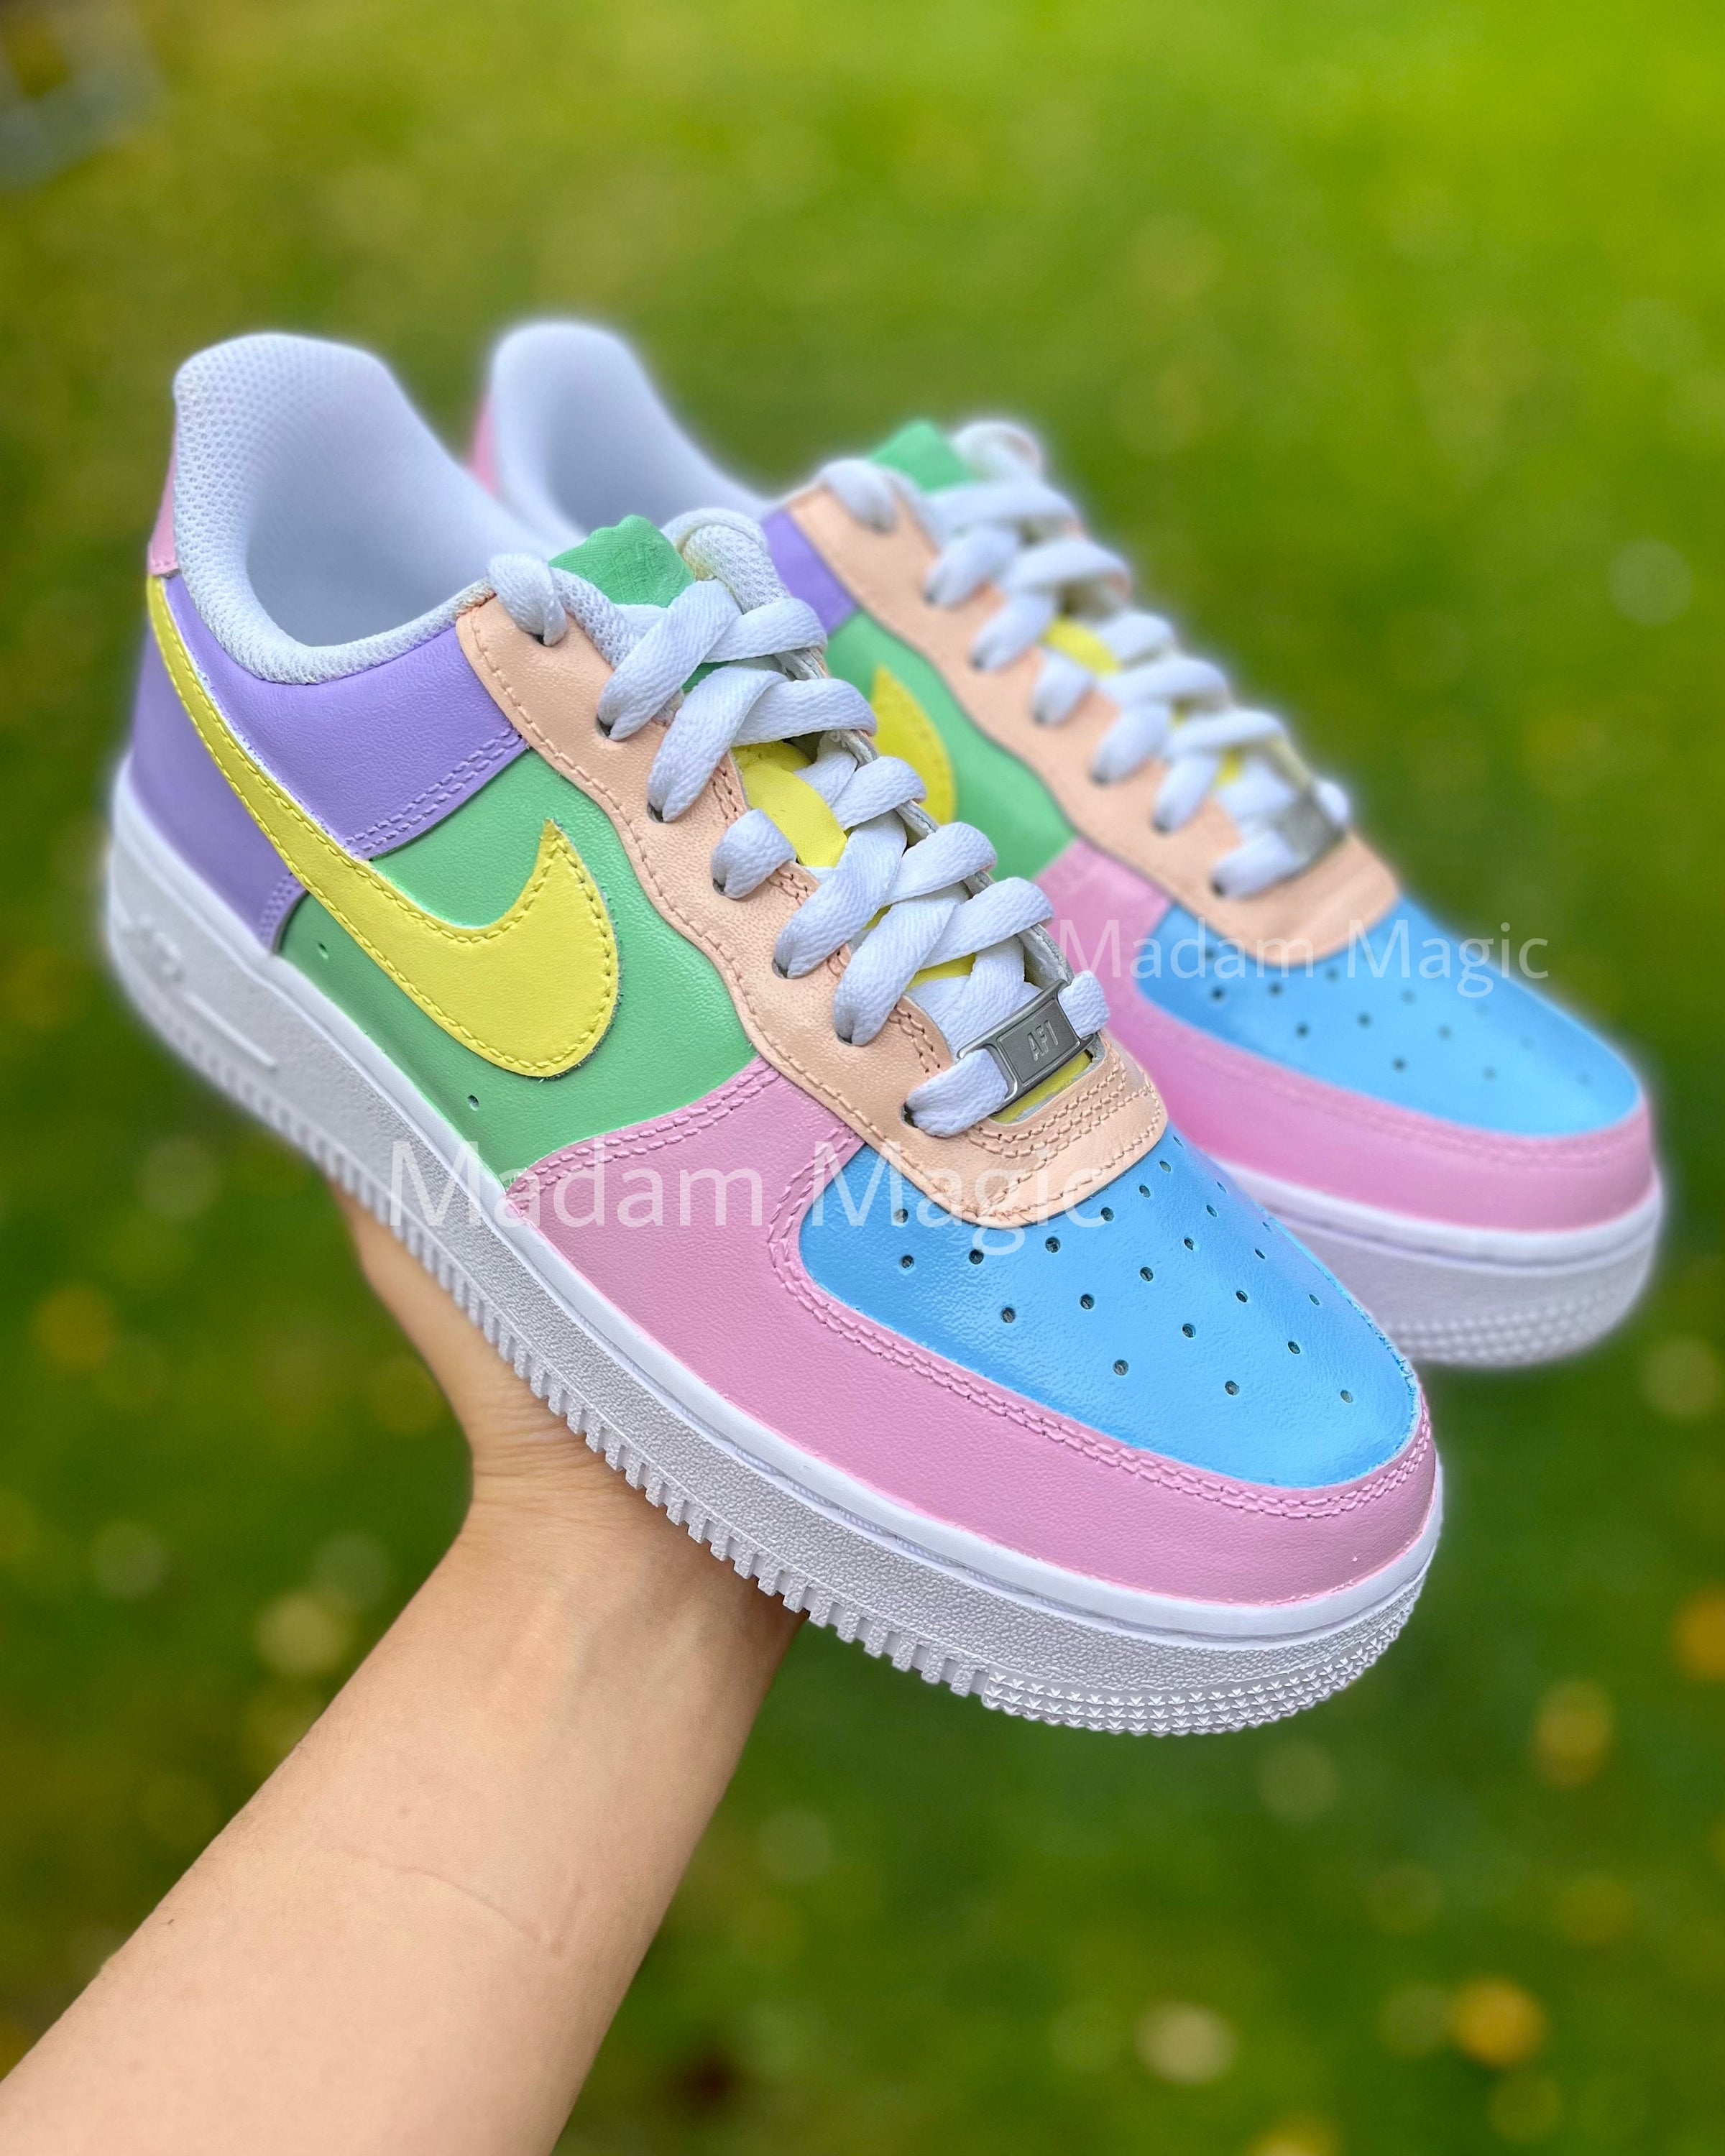 Air Force 1 Custom Low Pastel Multi Color Shoes Green Teal Red Yellow Pink Purple All Sizes Af1 Sneakers 14 Mens (15.5 Women's)